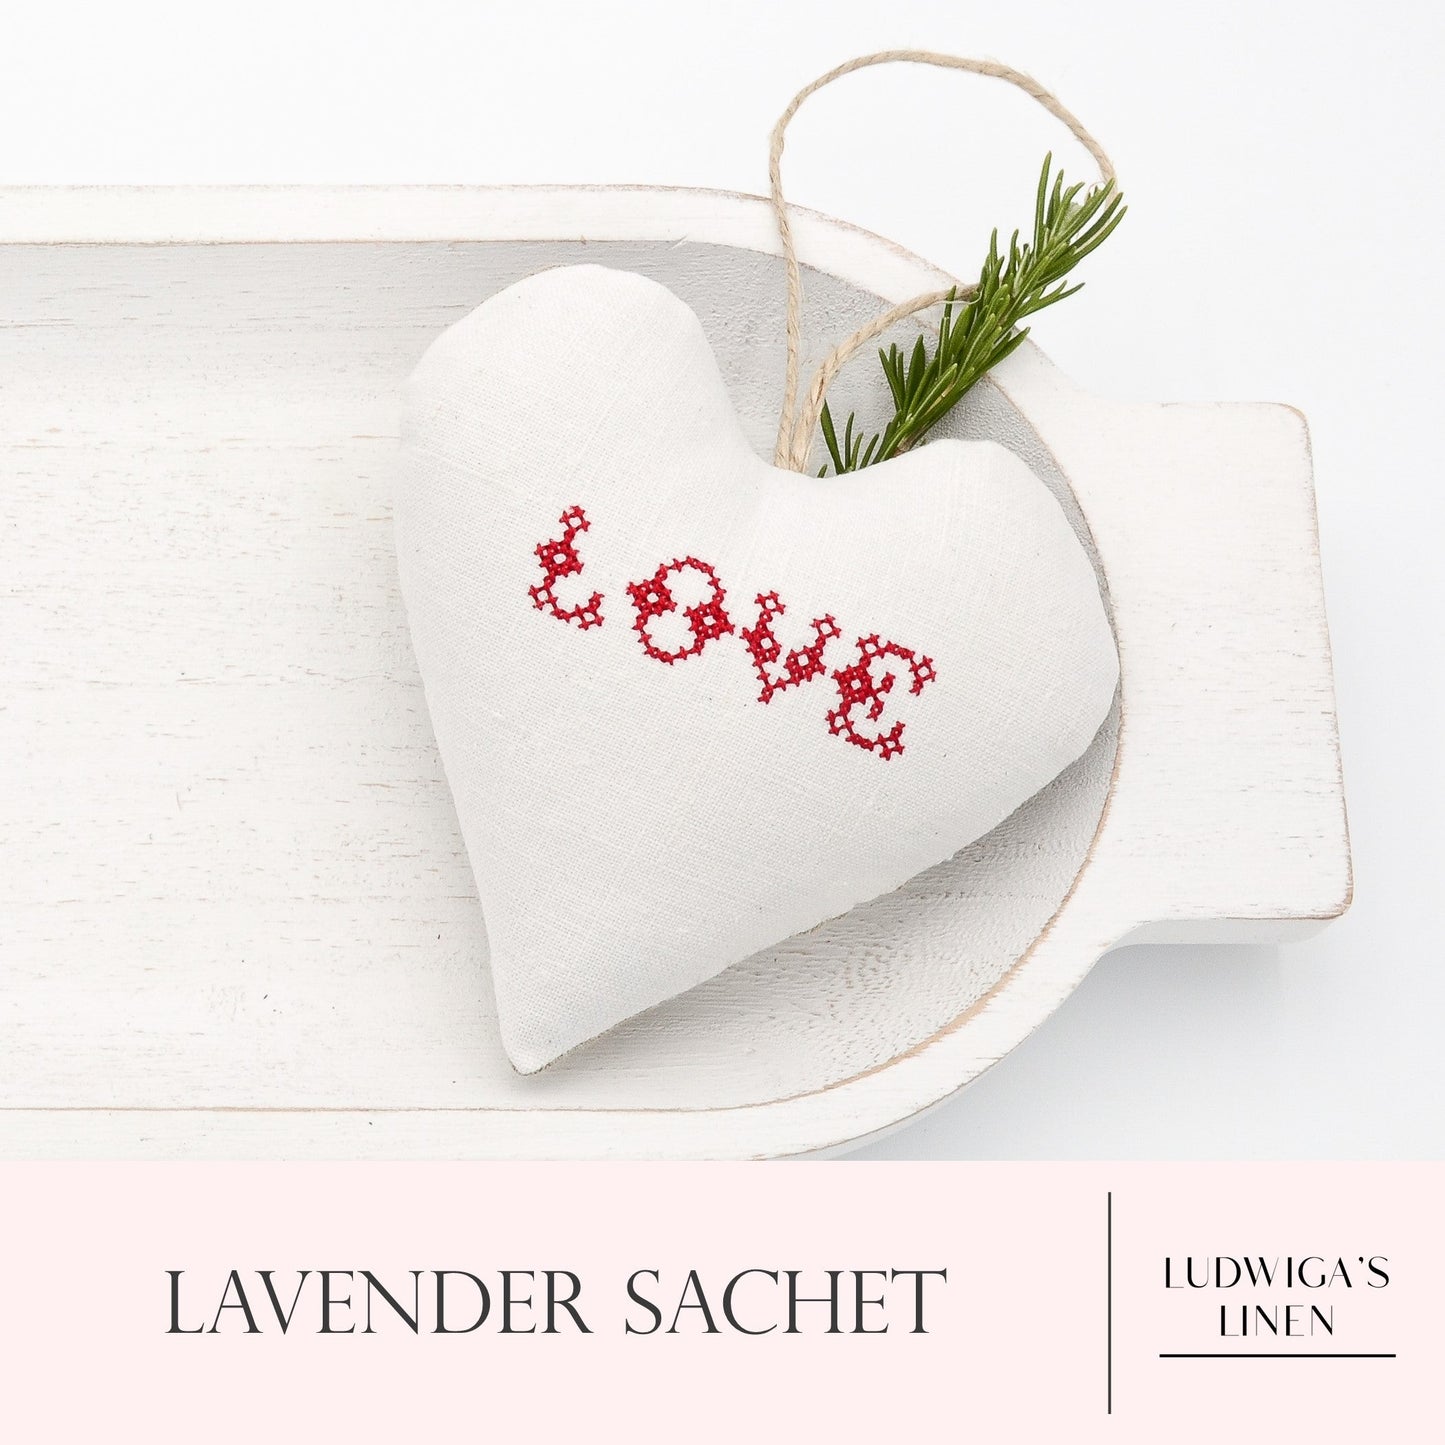 Antique/vintage European white linen lavender sachet heart with "LOVE" embroidered in red, hemp twine tie and filled with high quality lavender from Provence France